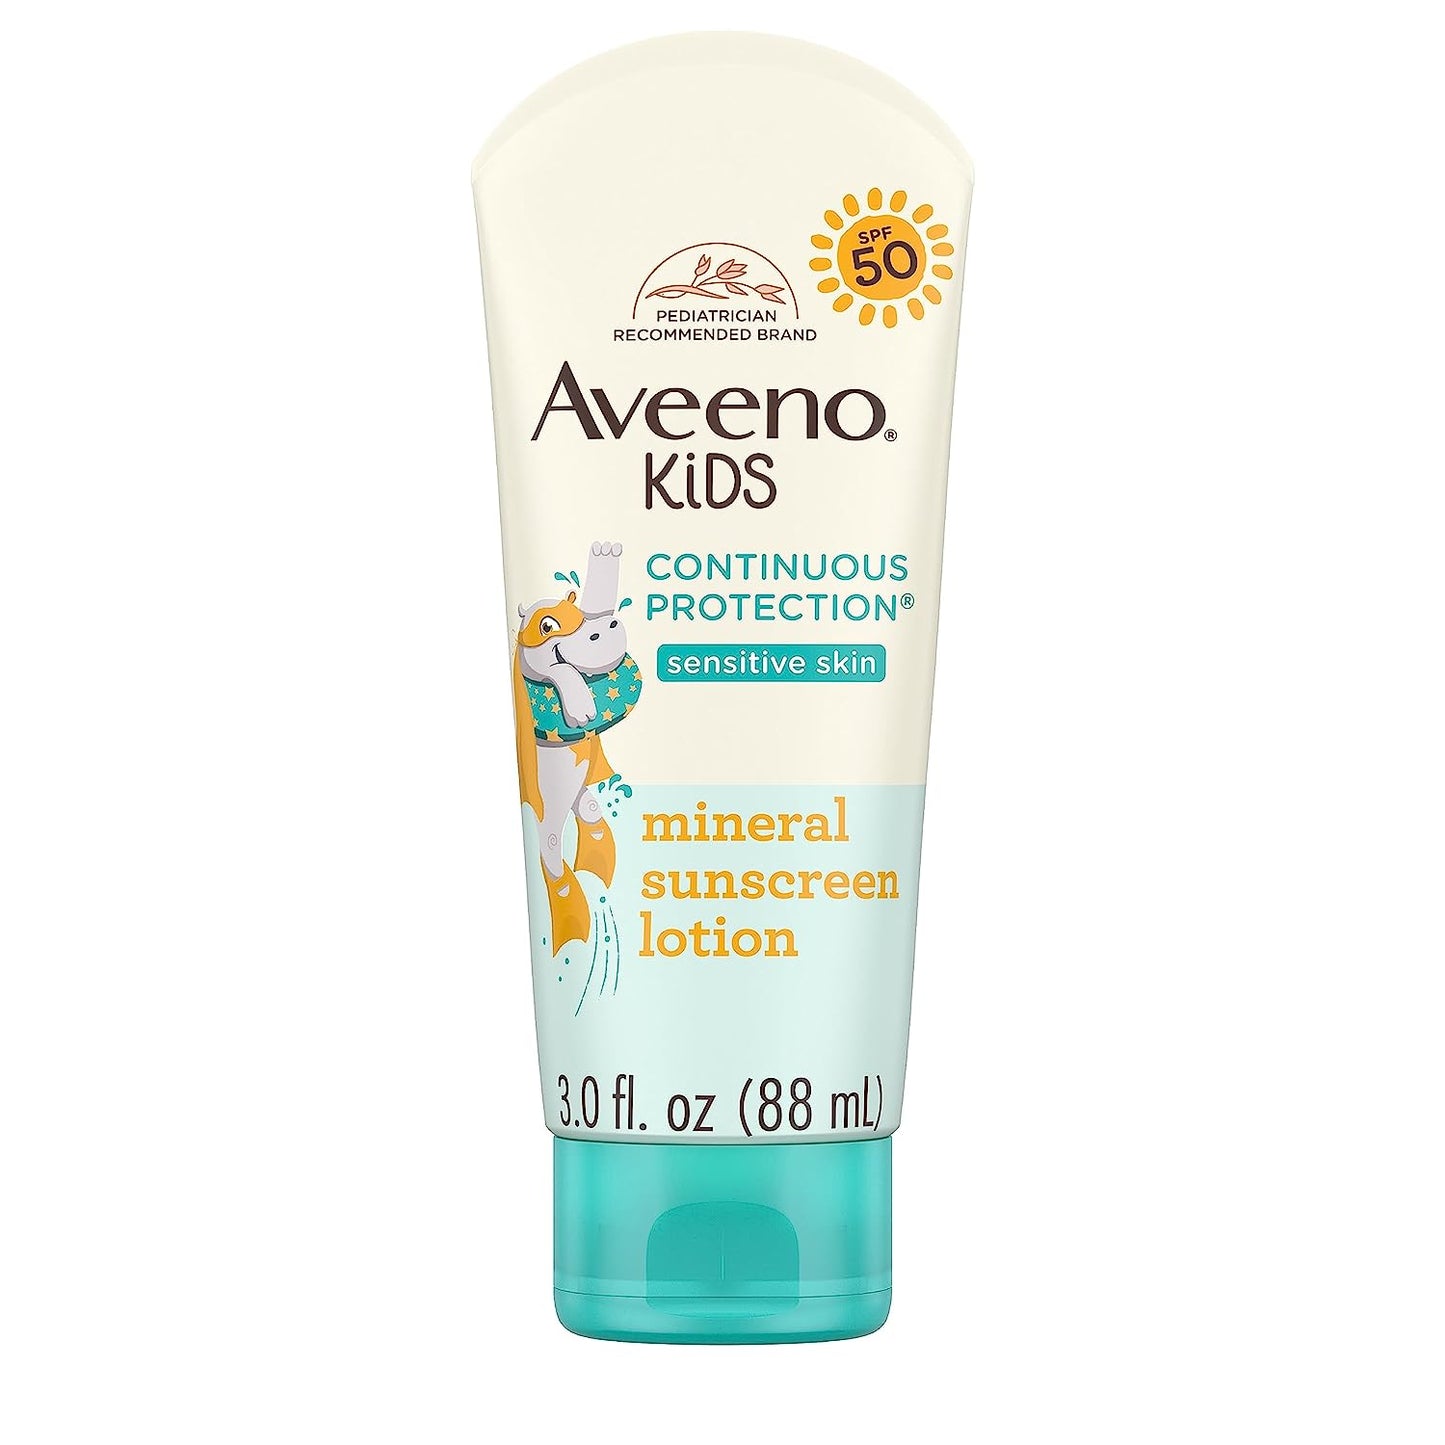 Aveeno Kids Continuous Protection Mineral Sunscreen, Broad Spectrum SPF 50, 3 fl. oz (88ml)